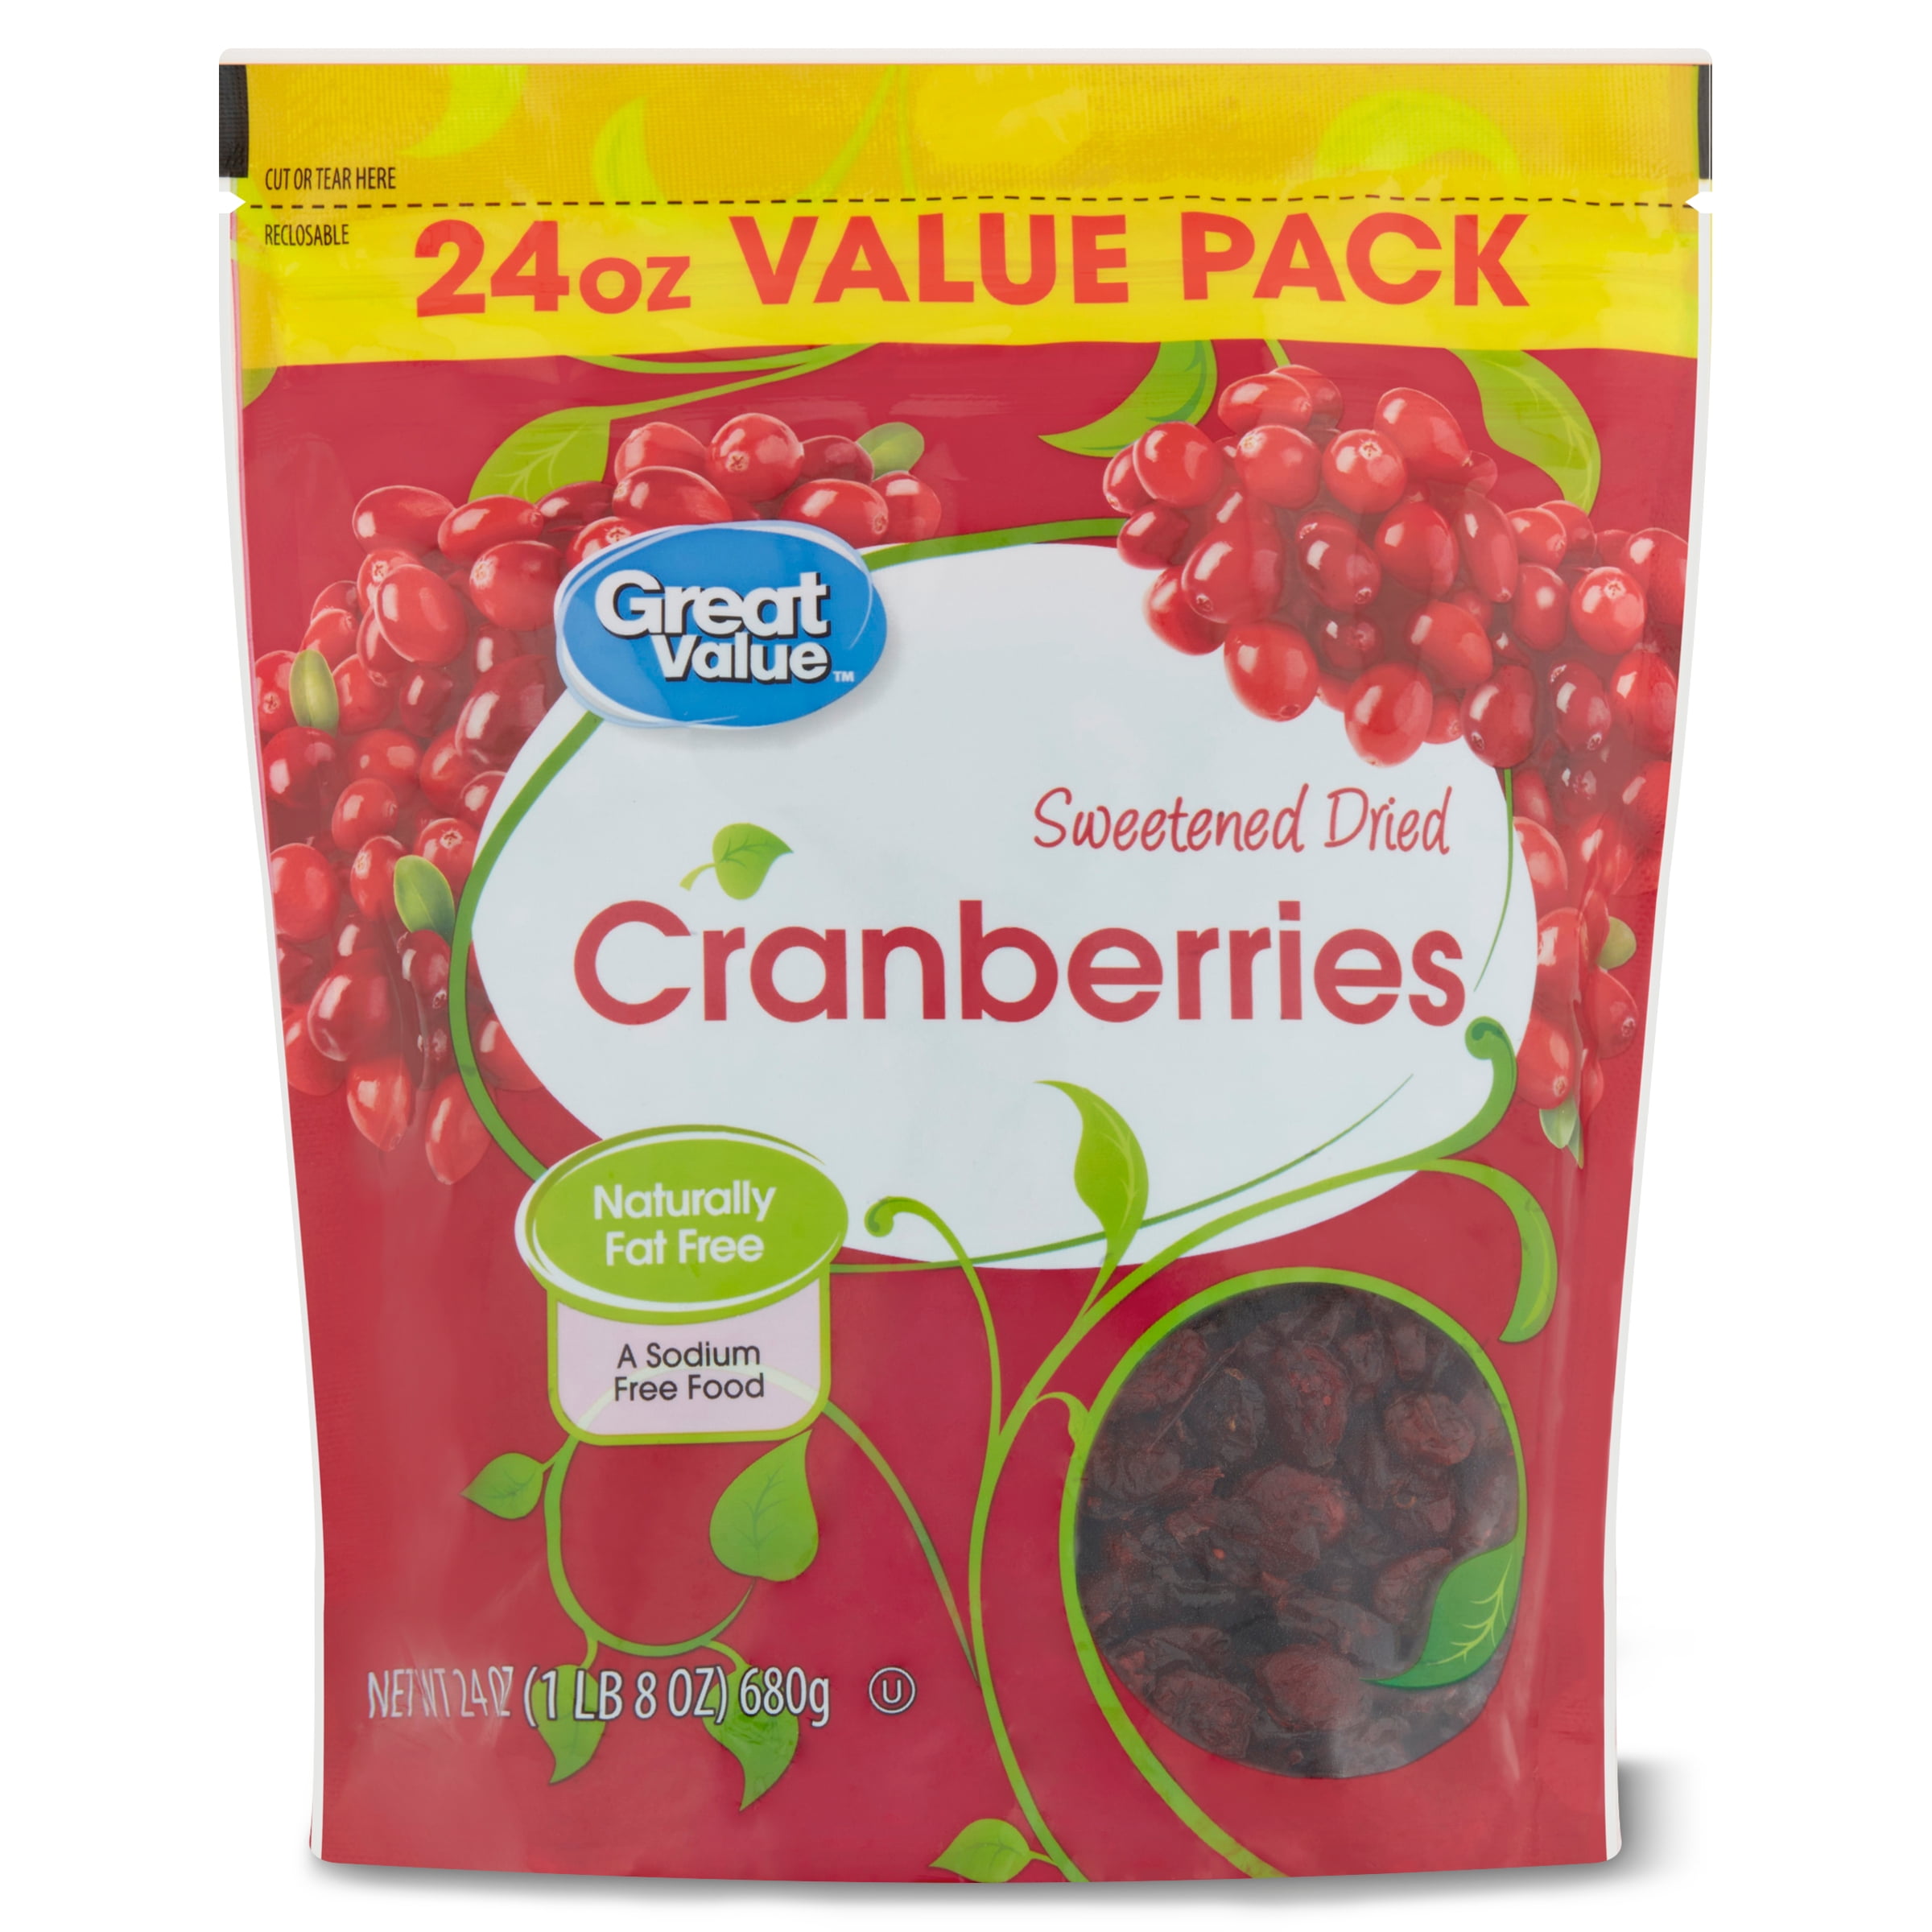 Where Are Dried Cranberries in Grocery Store?